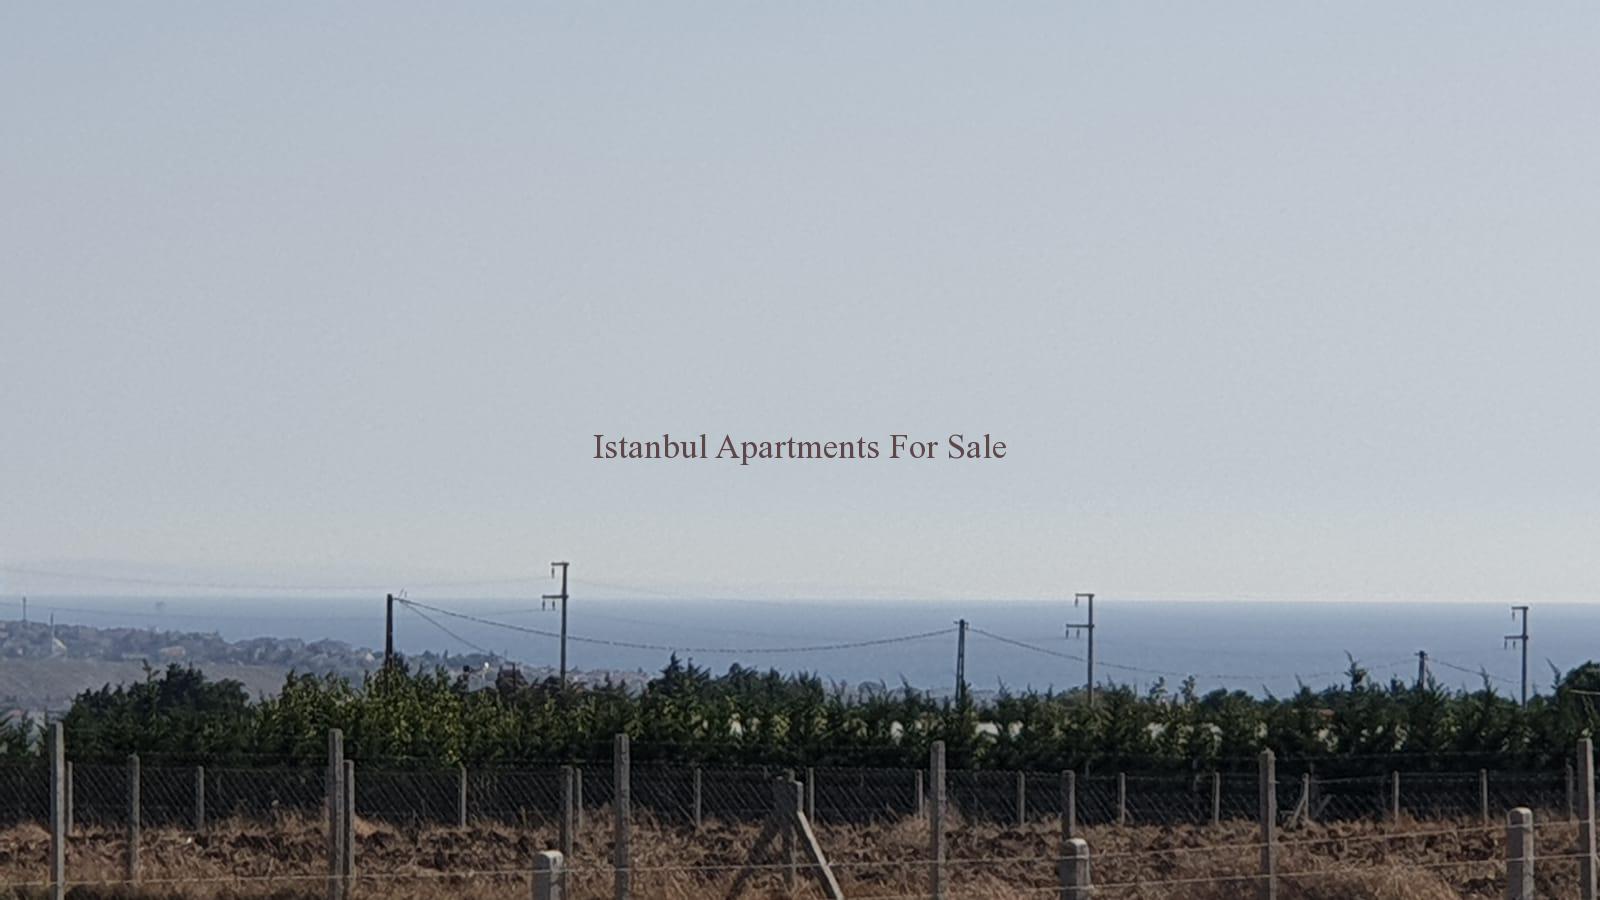 Istanbul Apartments For Sale in Turkey Seaview building land for sale in Istanbul Silivri  